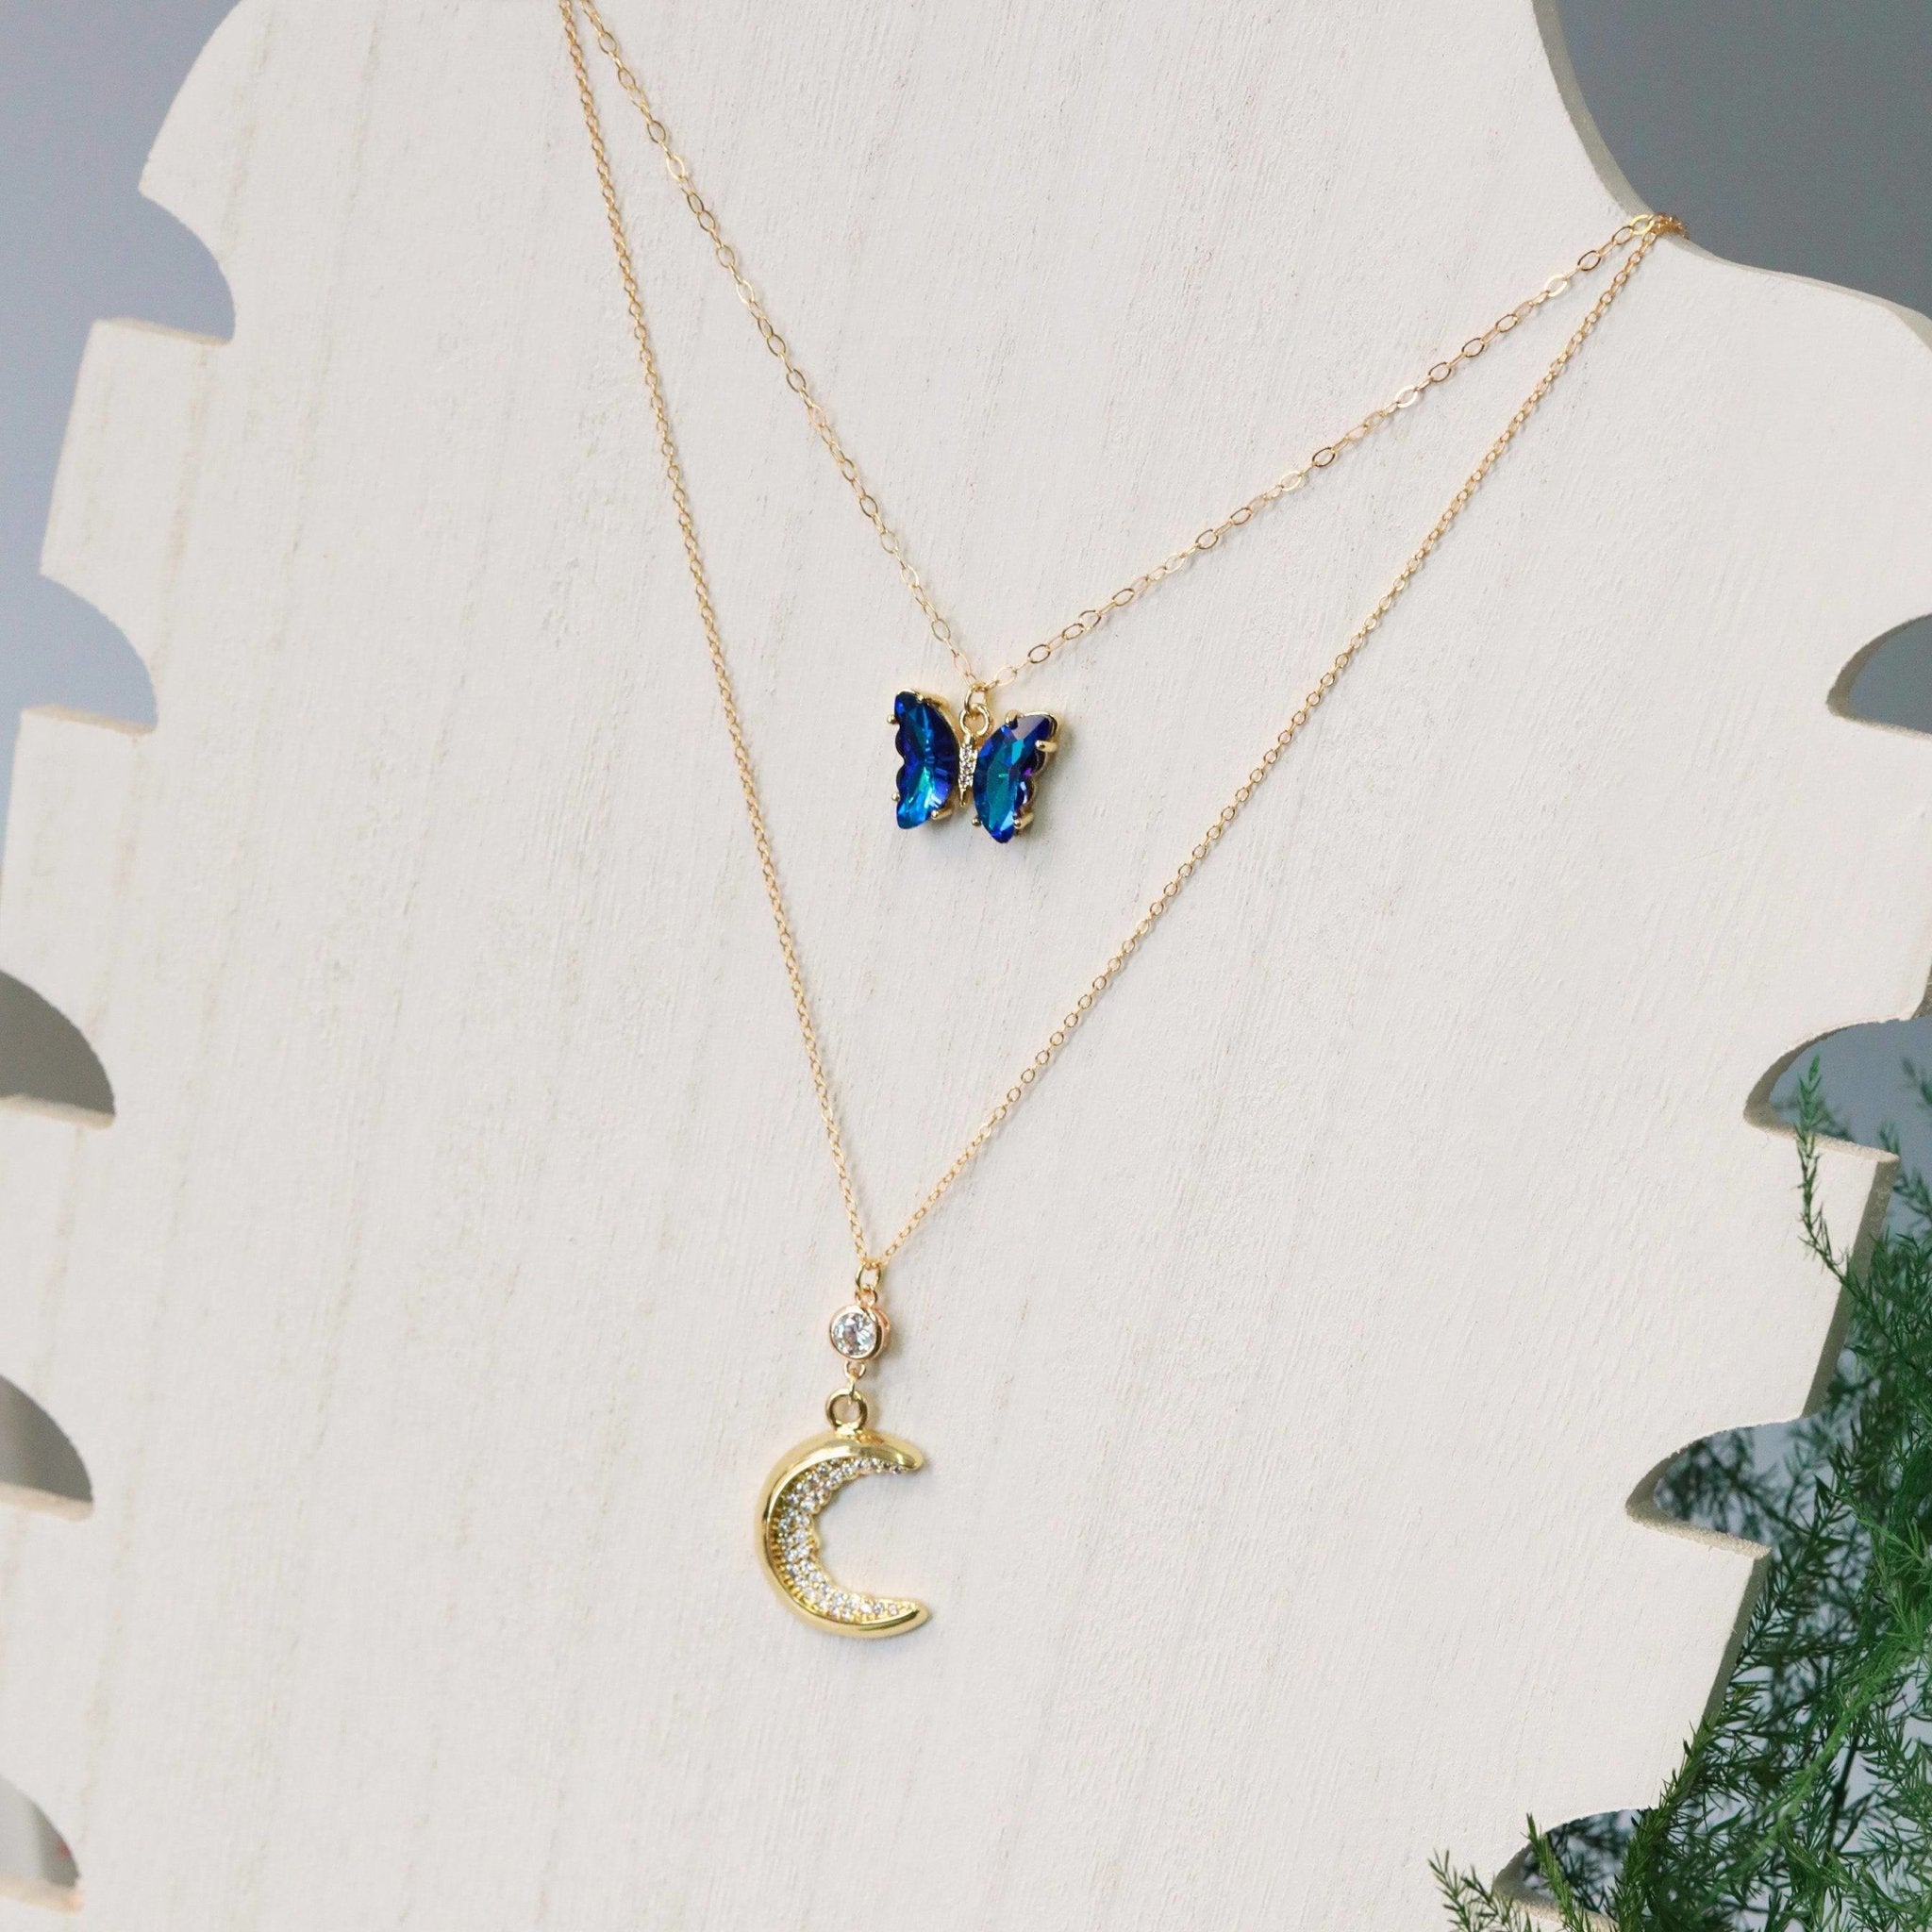 Crystal Crescent Moon Necklace - The Gilded Witch